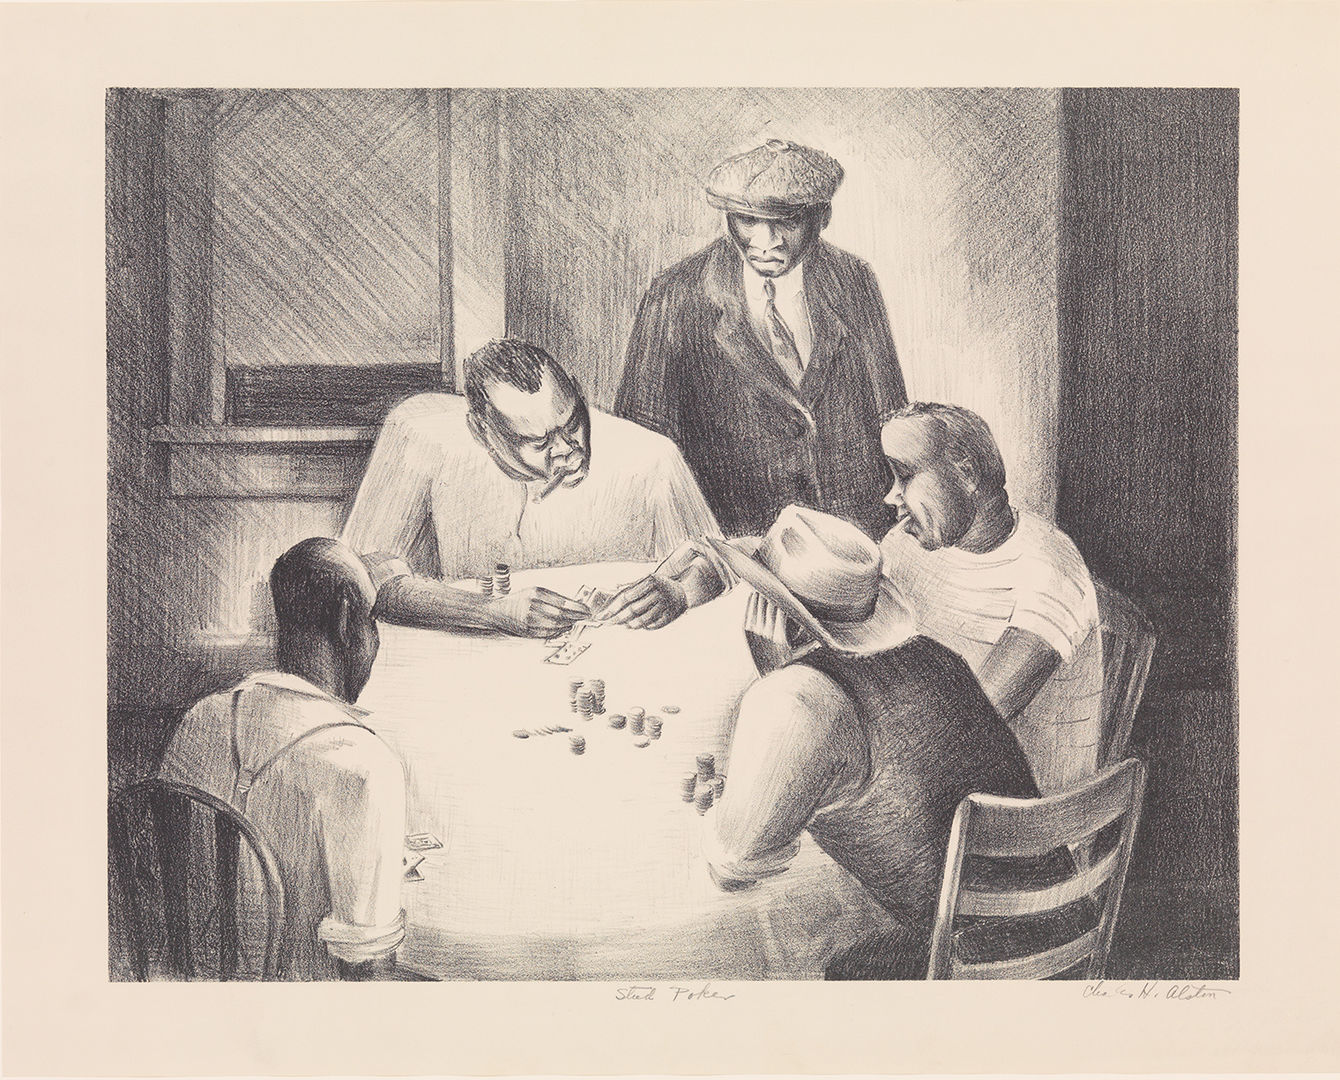 Five black men playing poker at a table with chips and cards. There is a window in the background. 